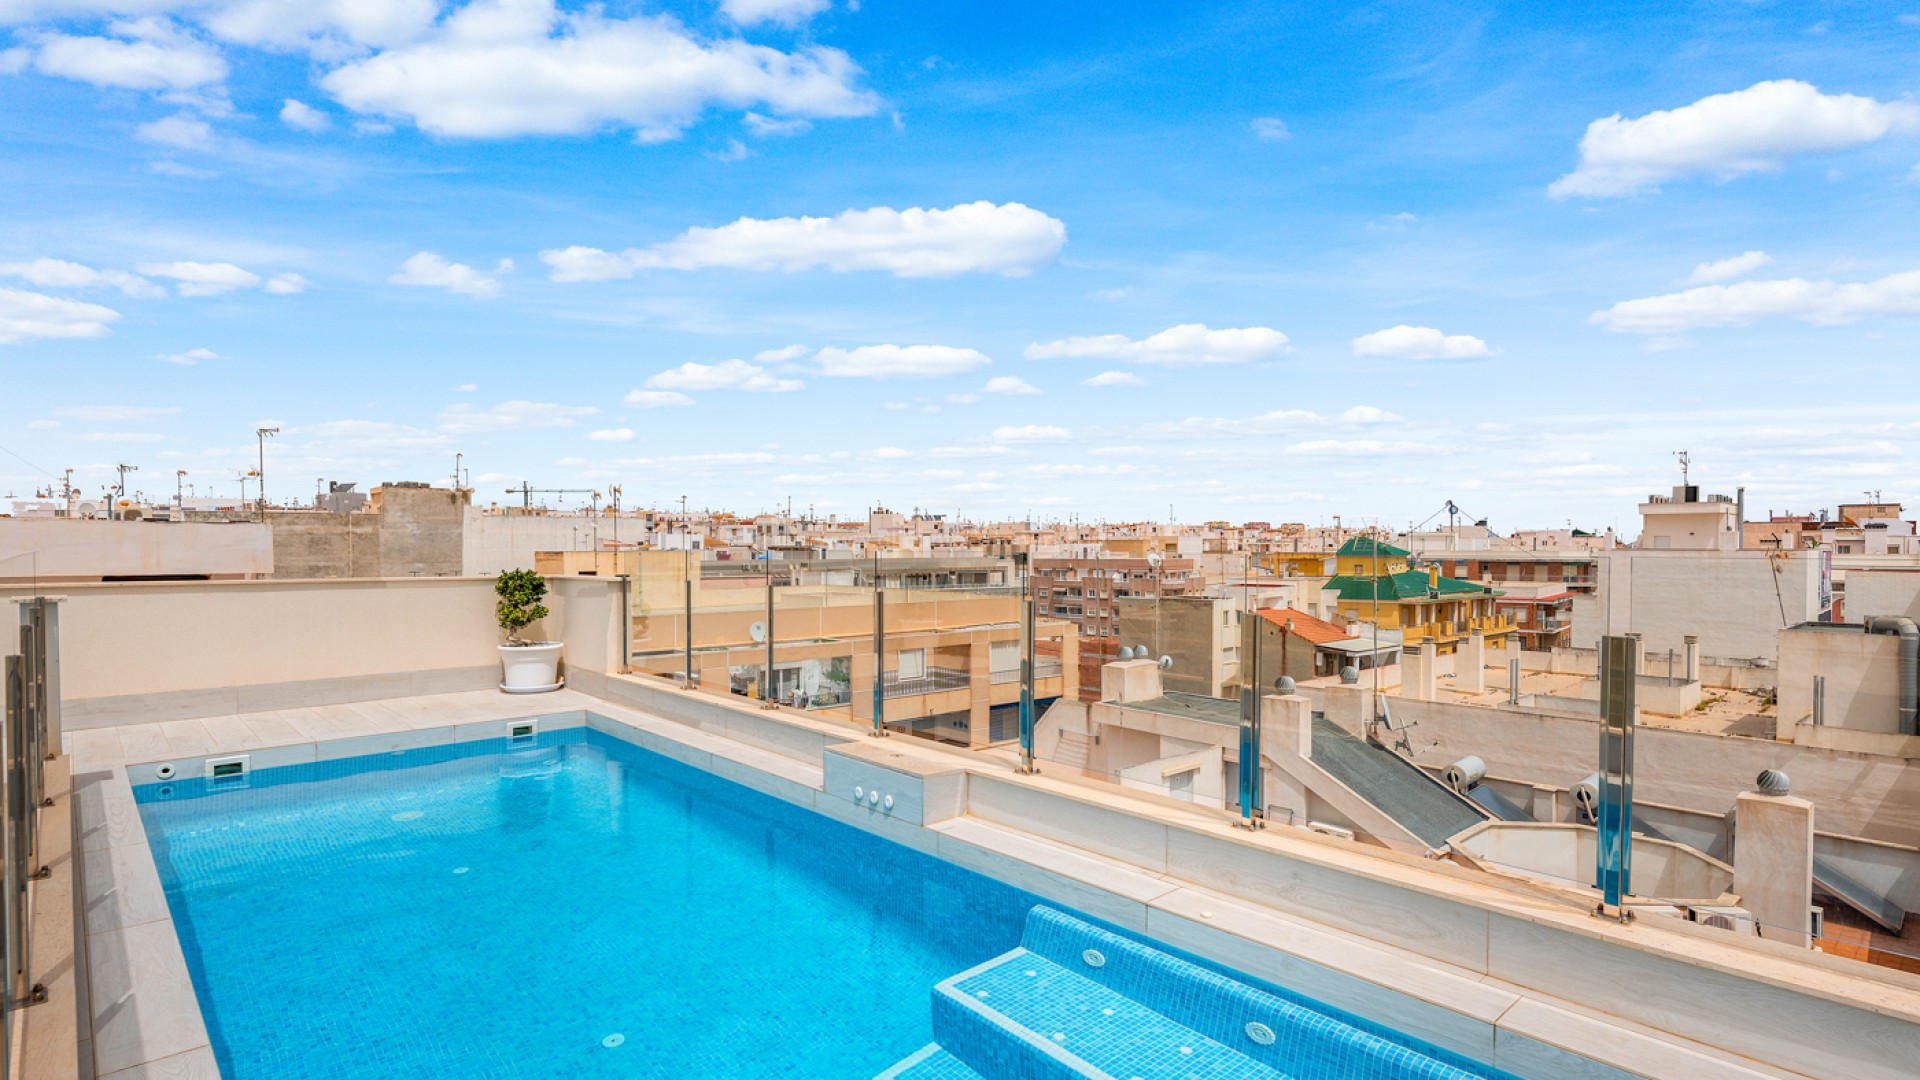 The apartments are located on the beach in Torrevieja, 2/3 bedrooms, 2 bathrooms, terraces/solarium, the solarium has a leisure area with pool and barbecue